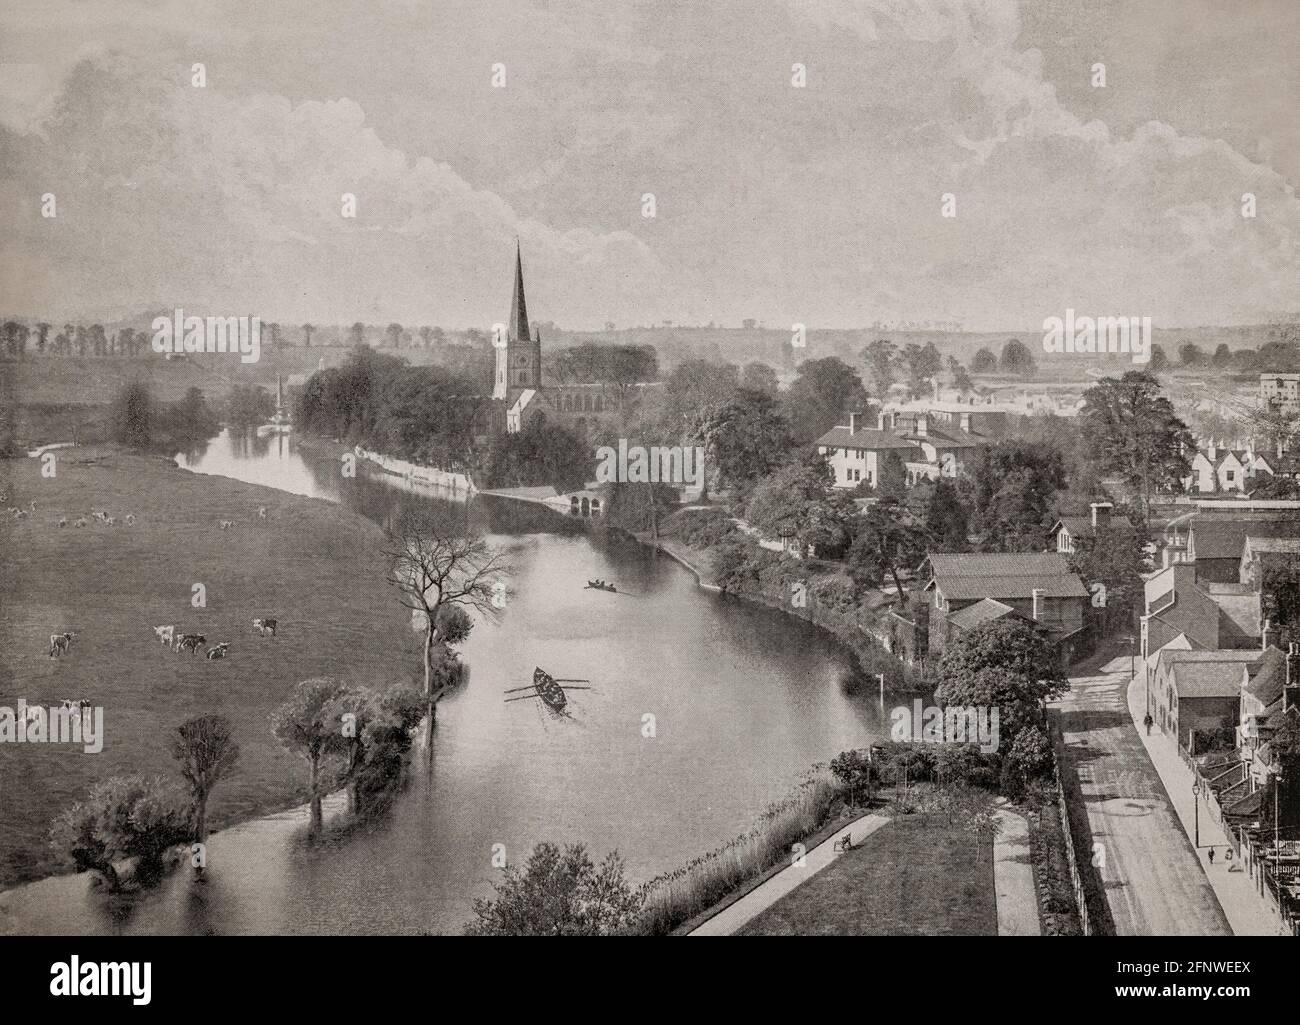 A late 19th Century aerial view of  the River Avon as it flows through Stratford-upon-Avon, aka Stratford, a market town in the county of Warwickshire,England. The town is a popular tourist destination owing to its status as the birthplace and gravesite of playwright and poet William Shakespeare. Stock Photo